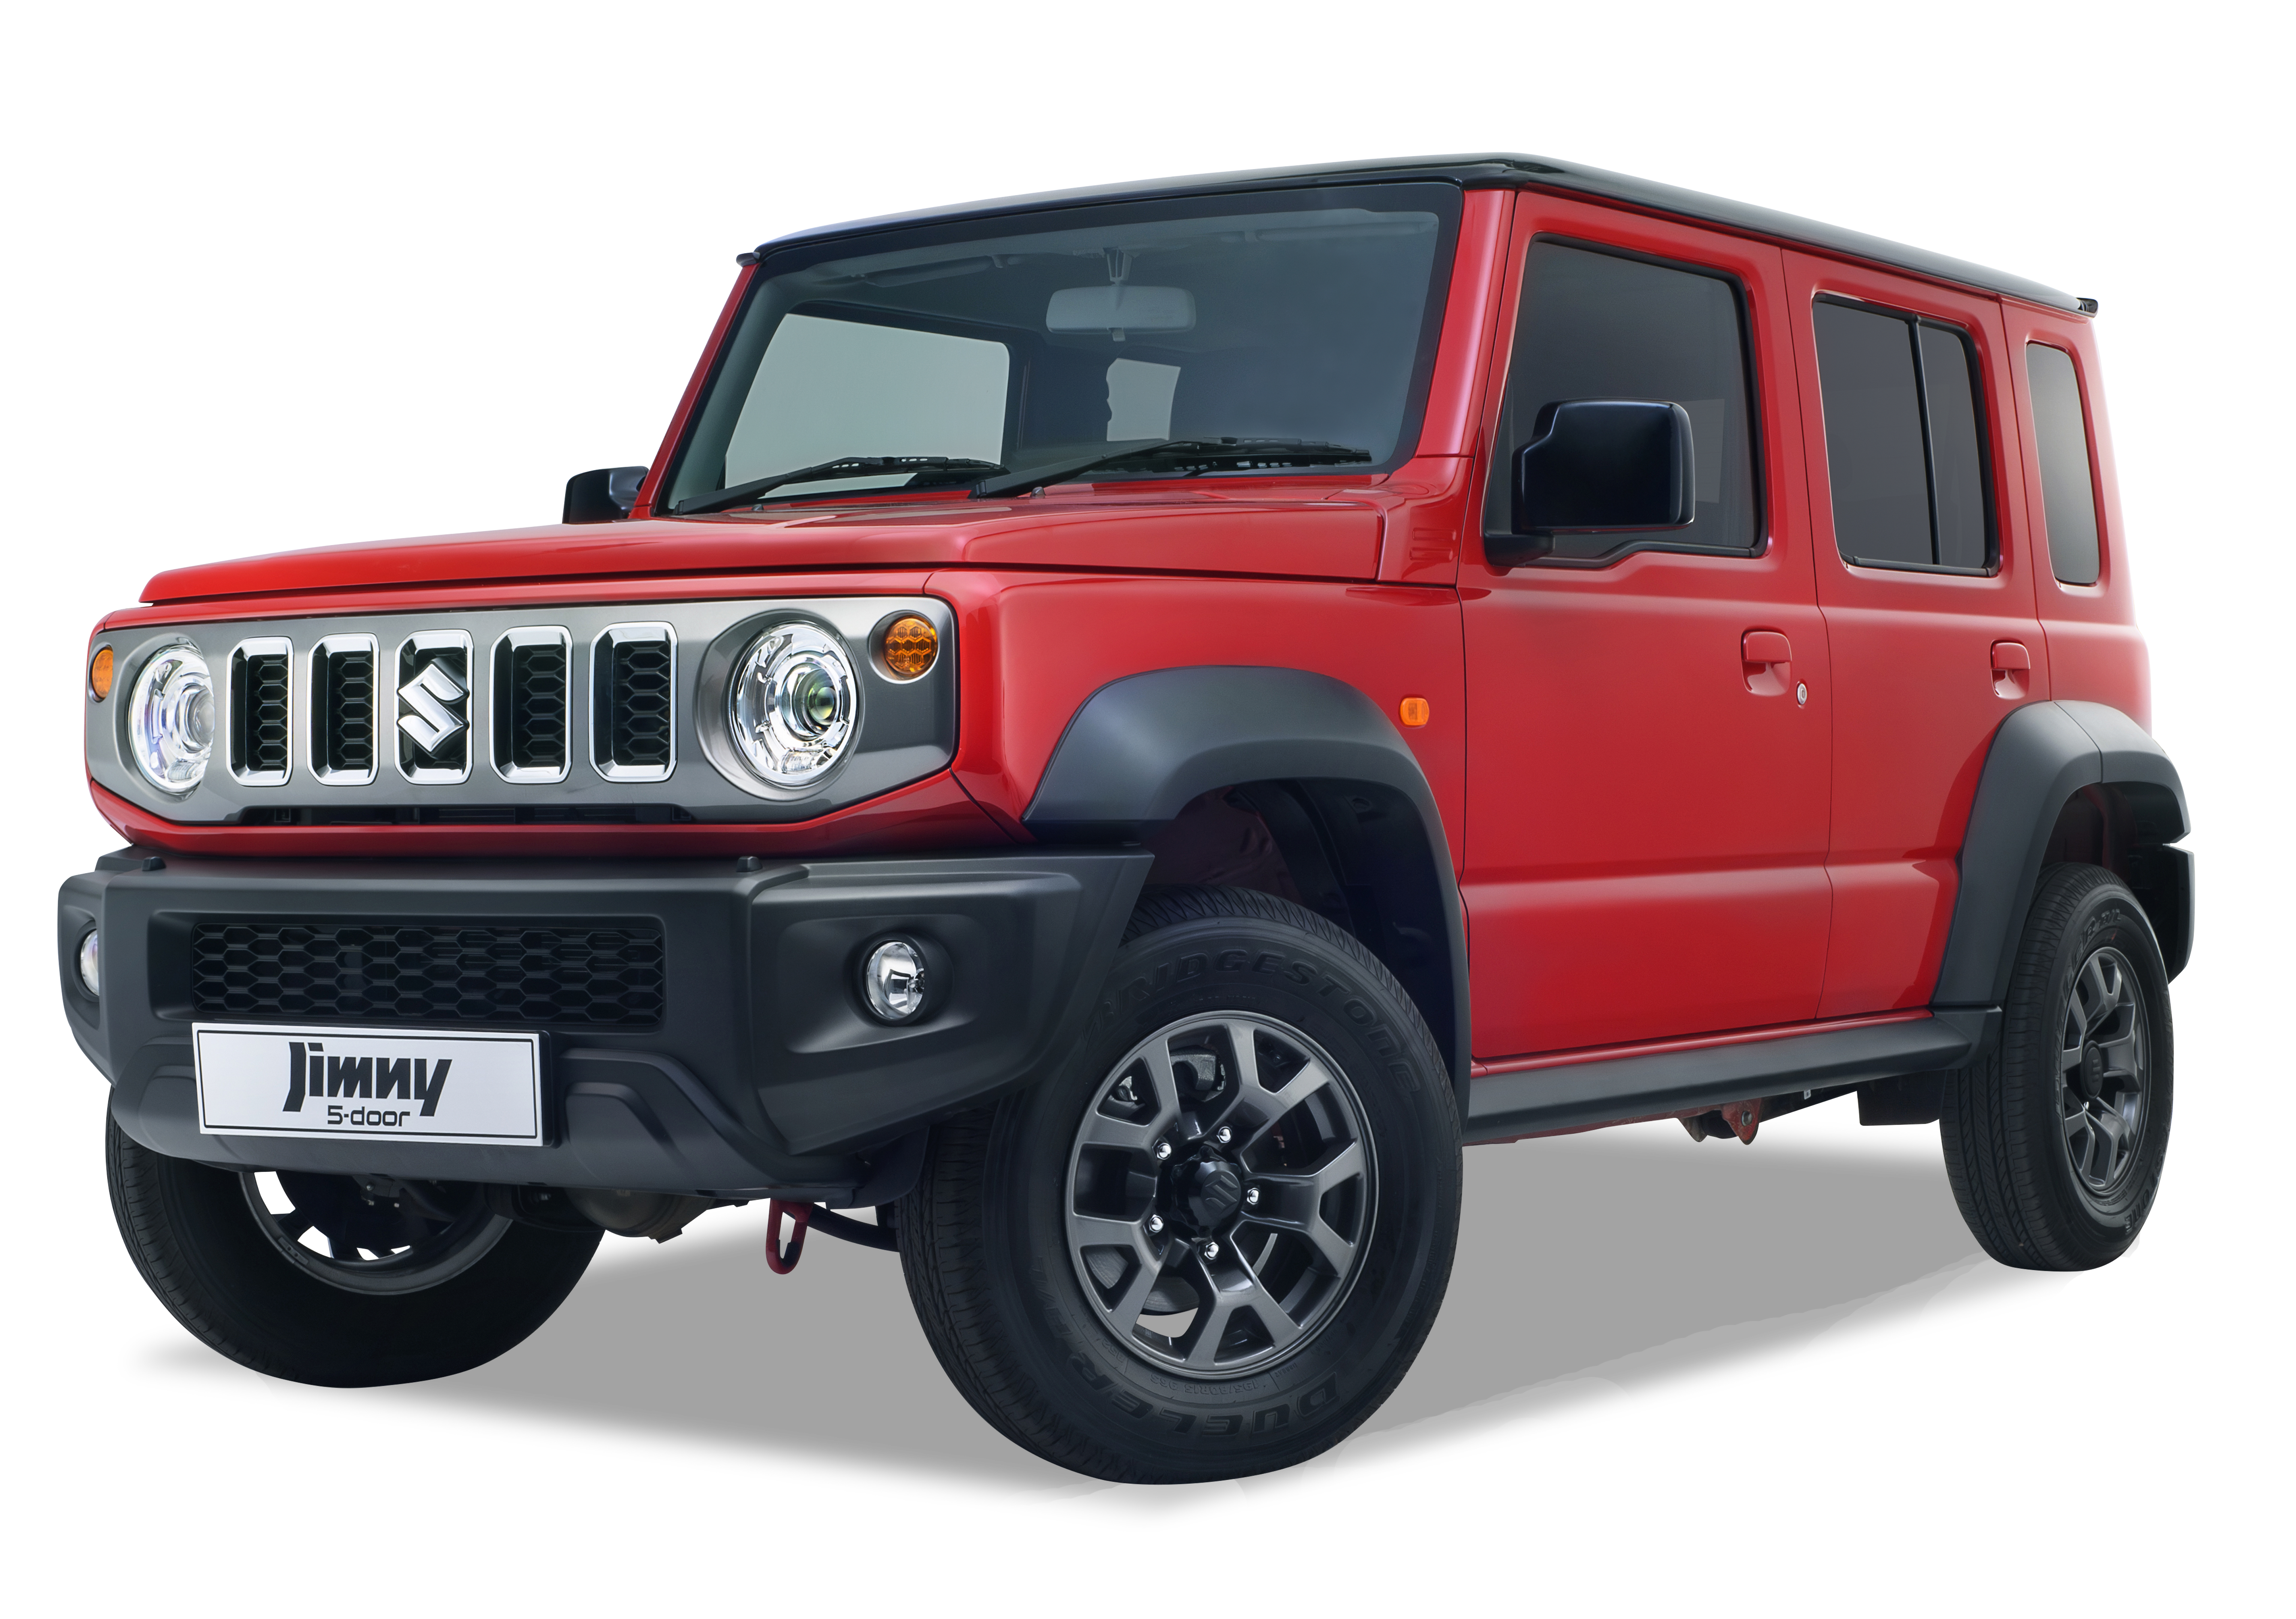 Review of Suzuki Jimny for Sale in South Africa